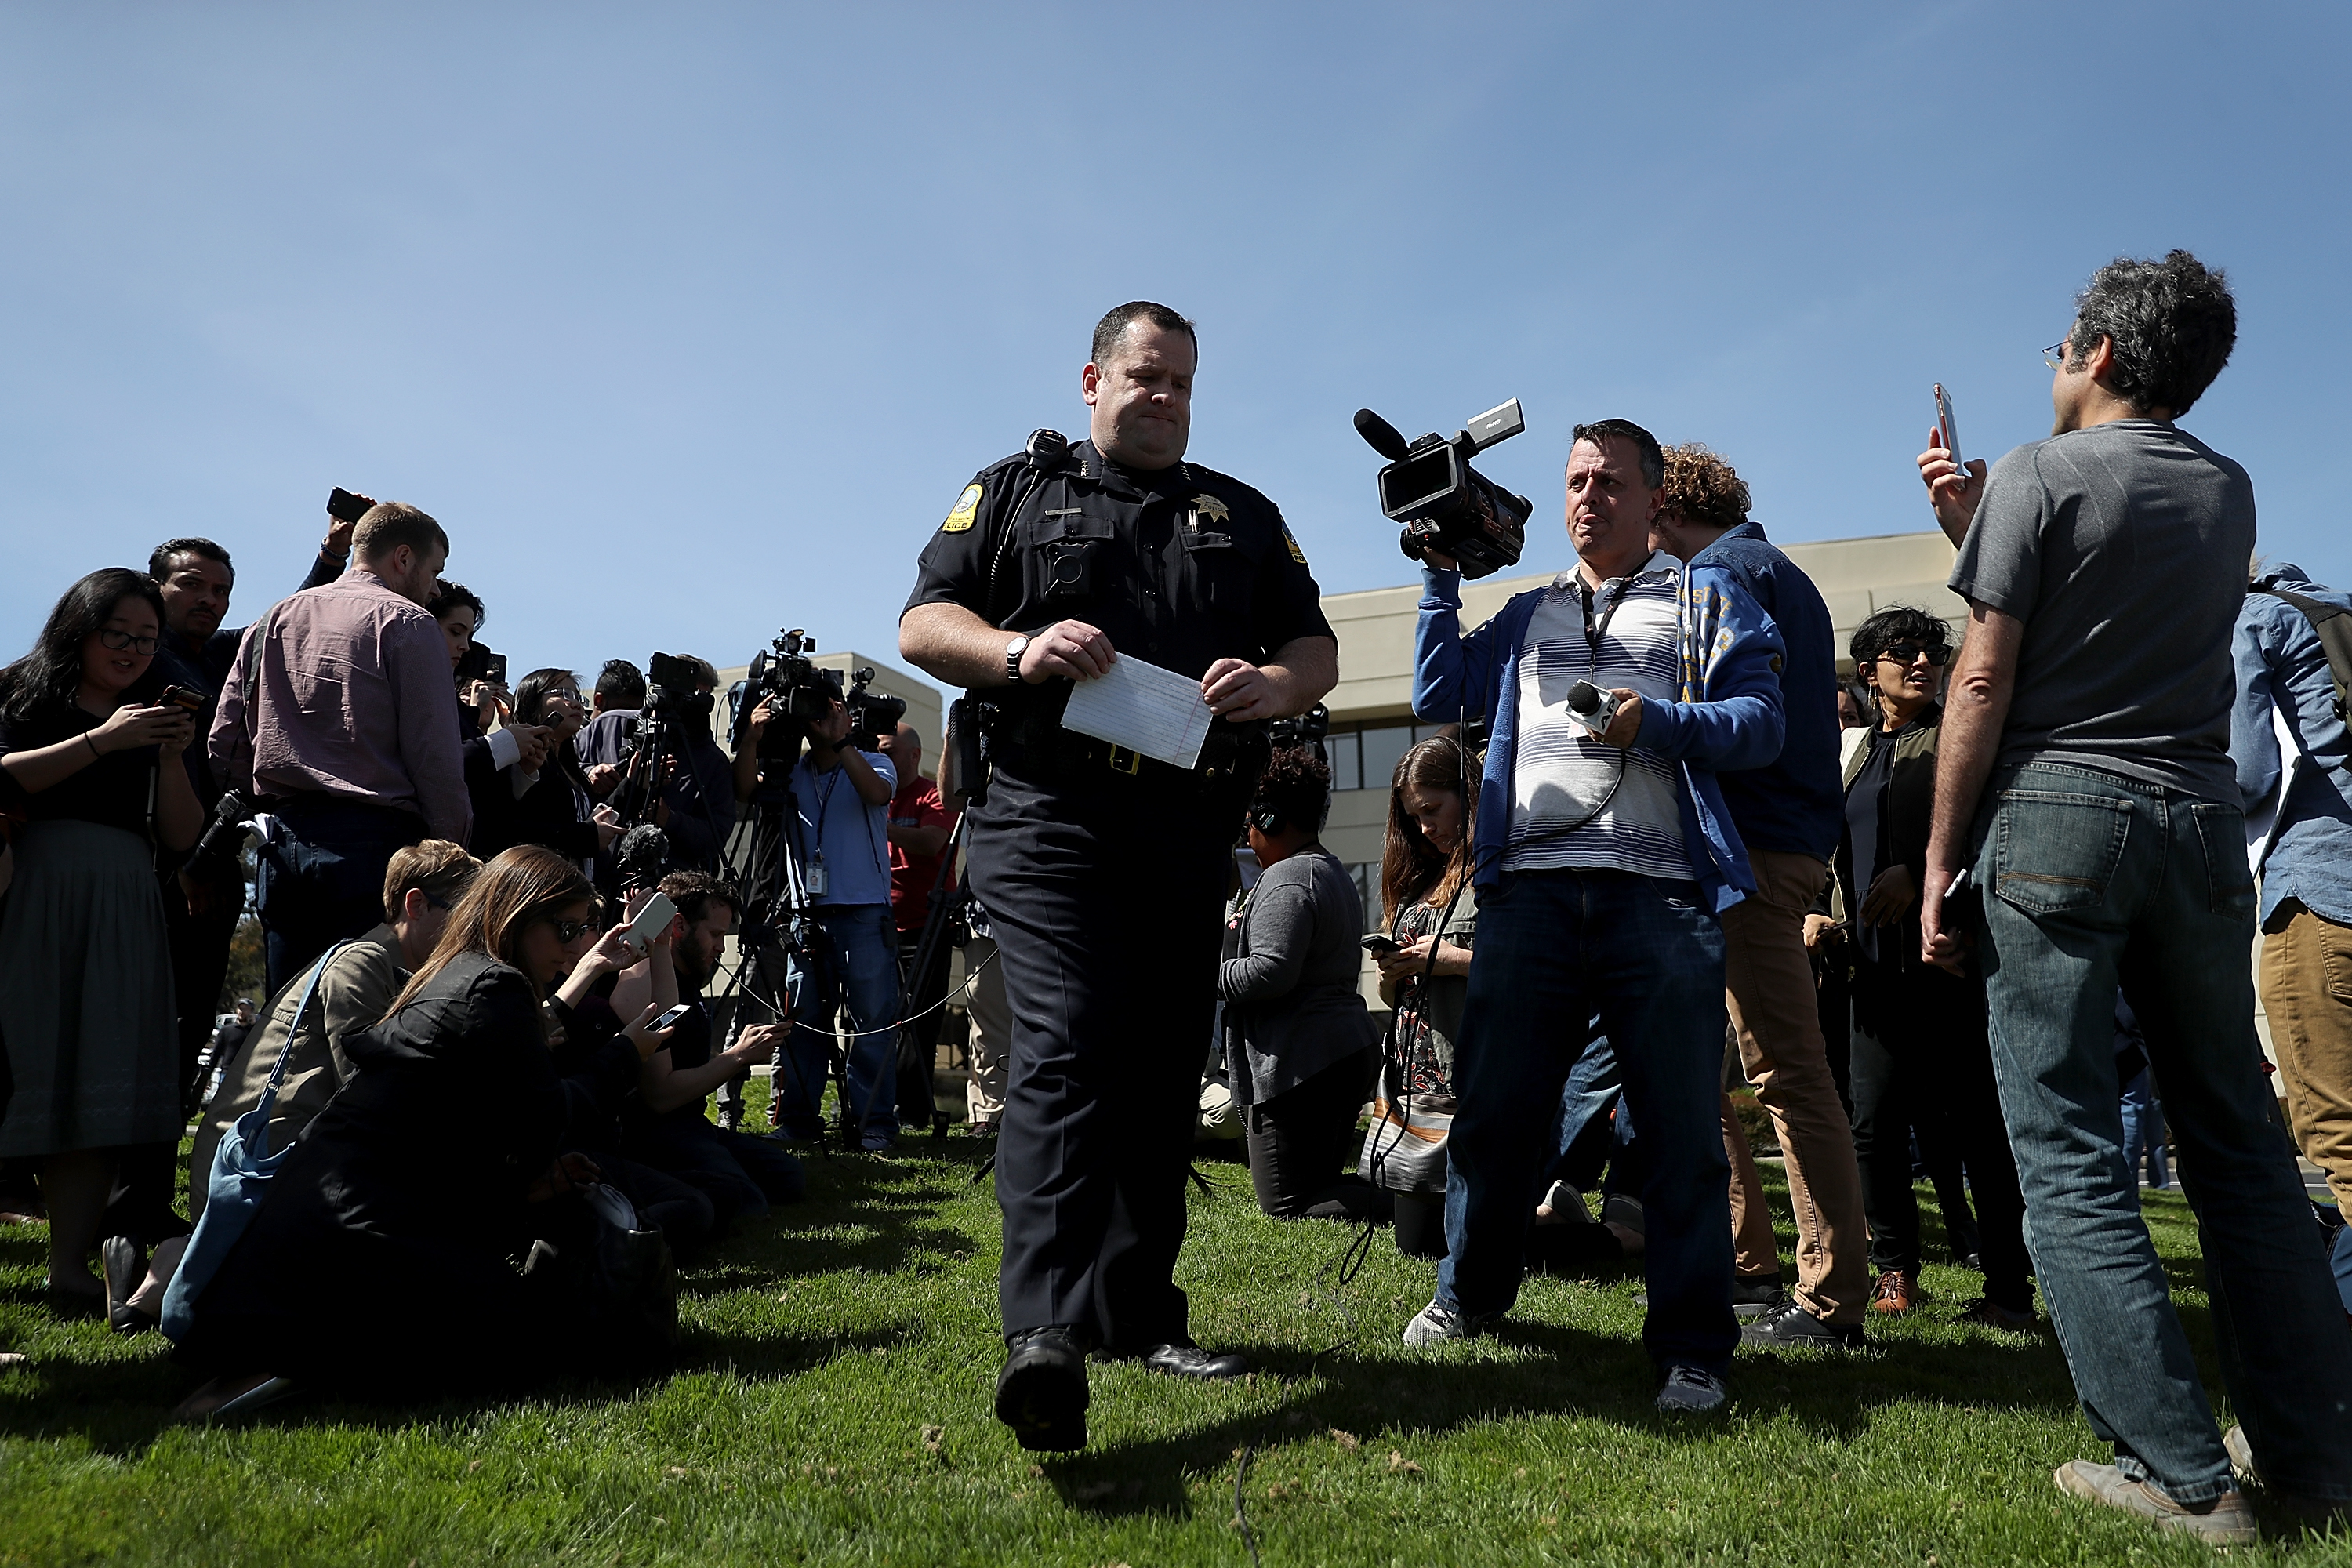 SAN BRUNO, CA - APRIL 03: San Bruno police chief Ed Barberini speaks to members of the media outside of the YouTube headquarters on April 3, 2018 in San Bruno, California. Police are investigating an active shooter incident at YouTube headquarters that has left at least one person dead and several wounded. (Photo by Justin Sullivan/Getty Images)